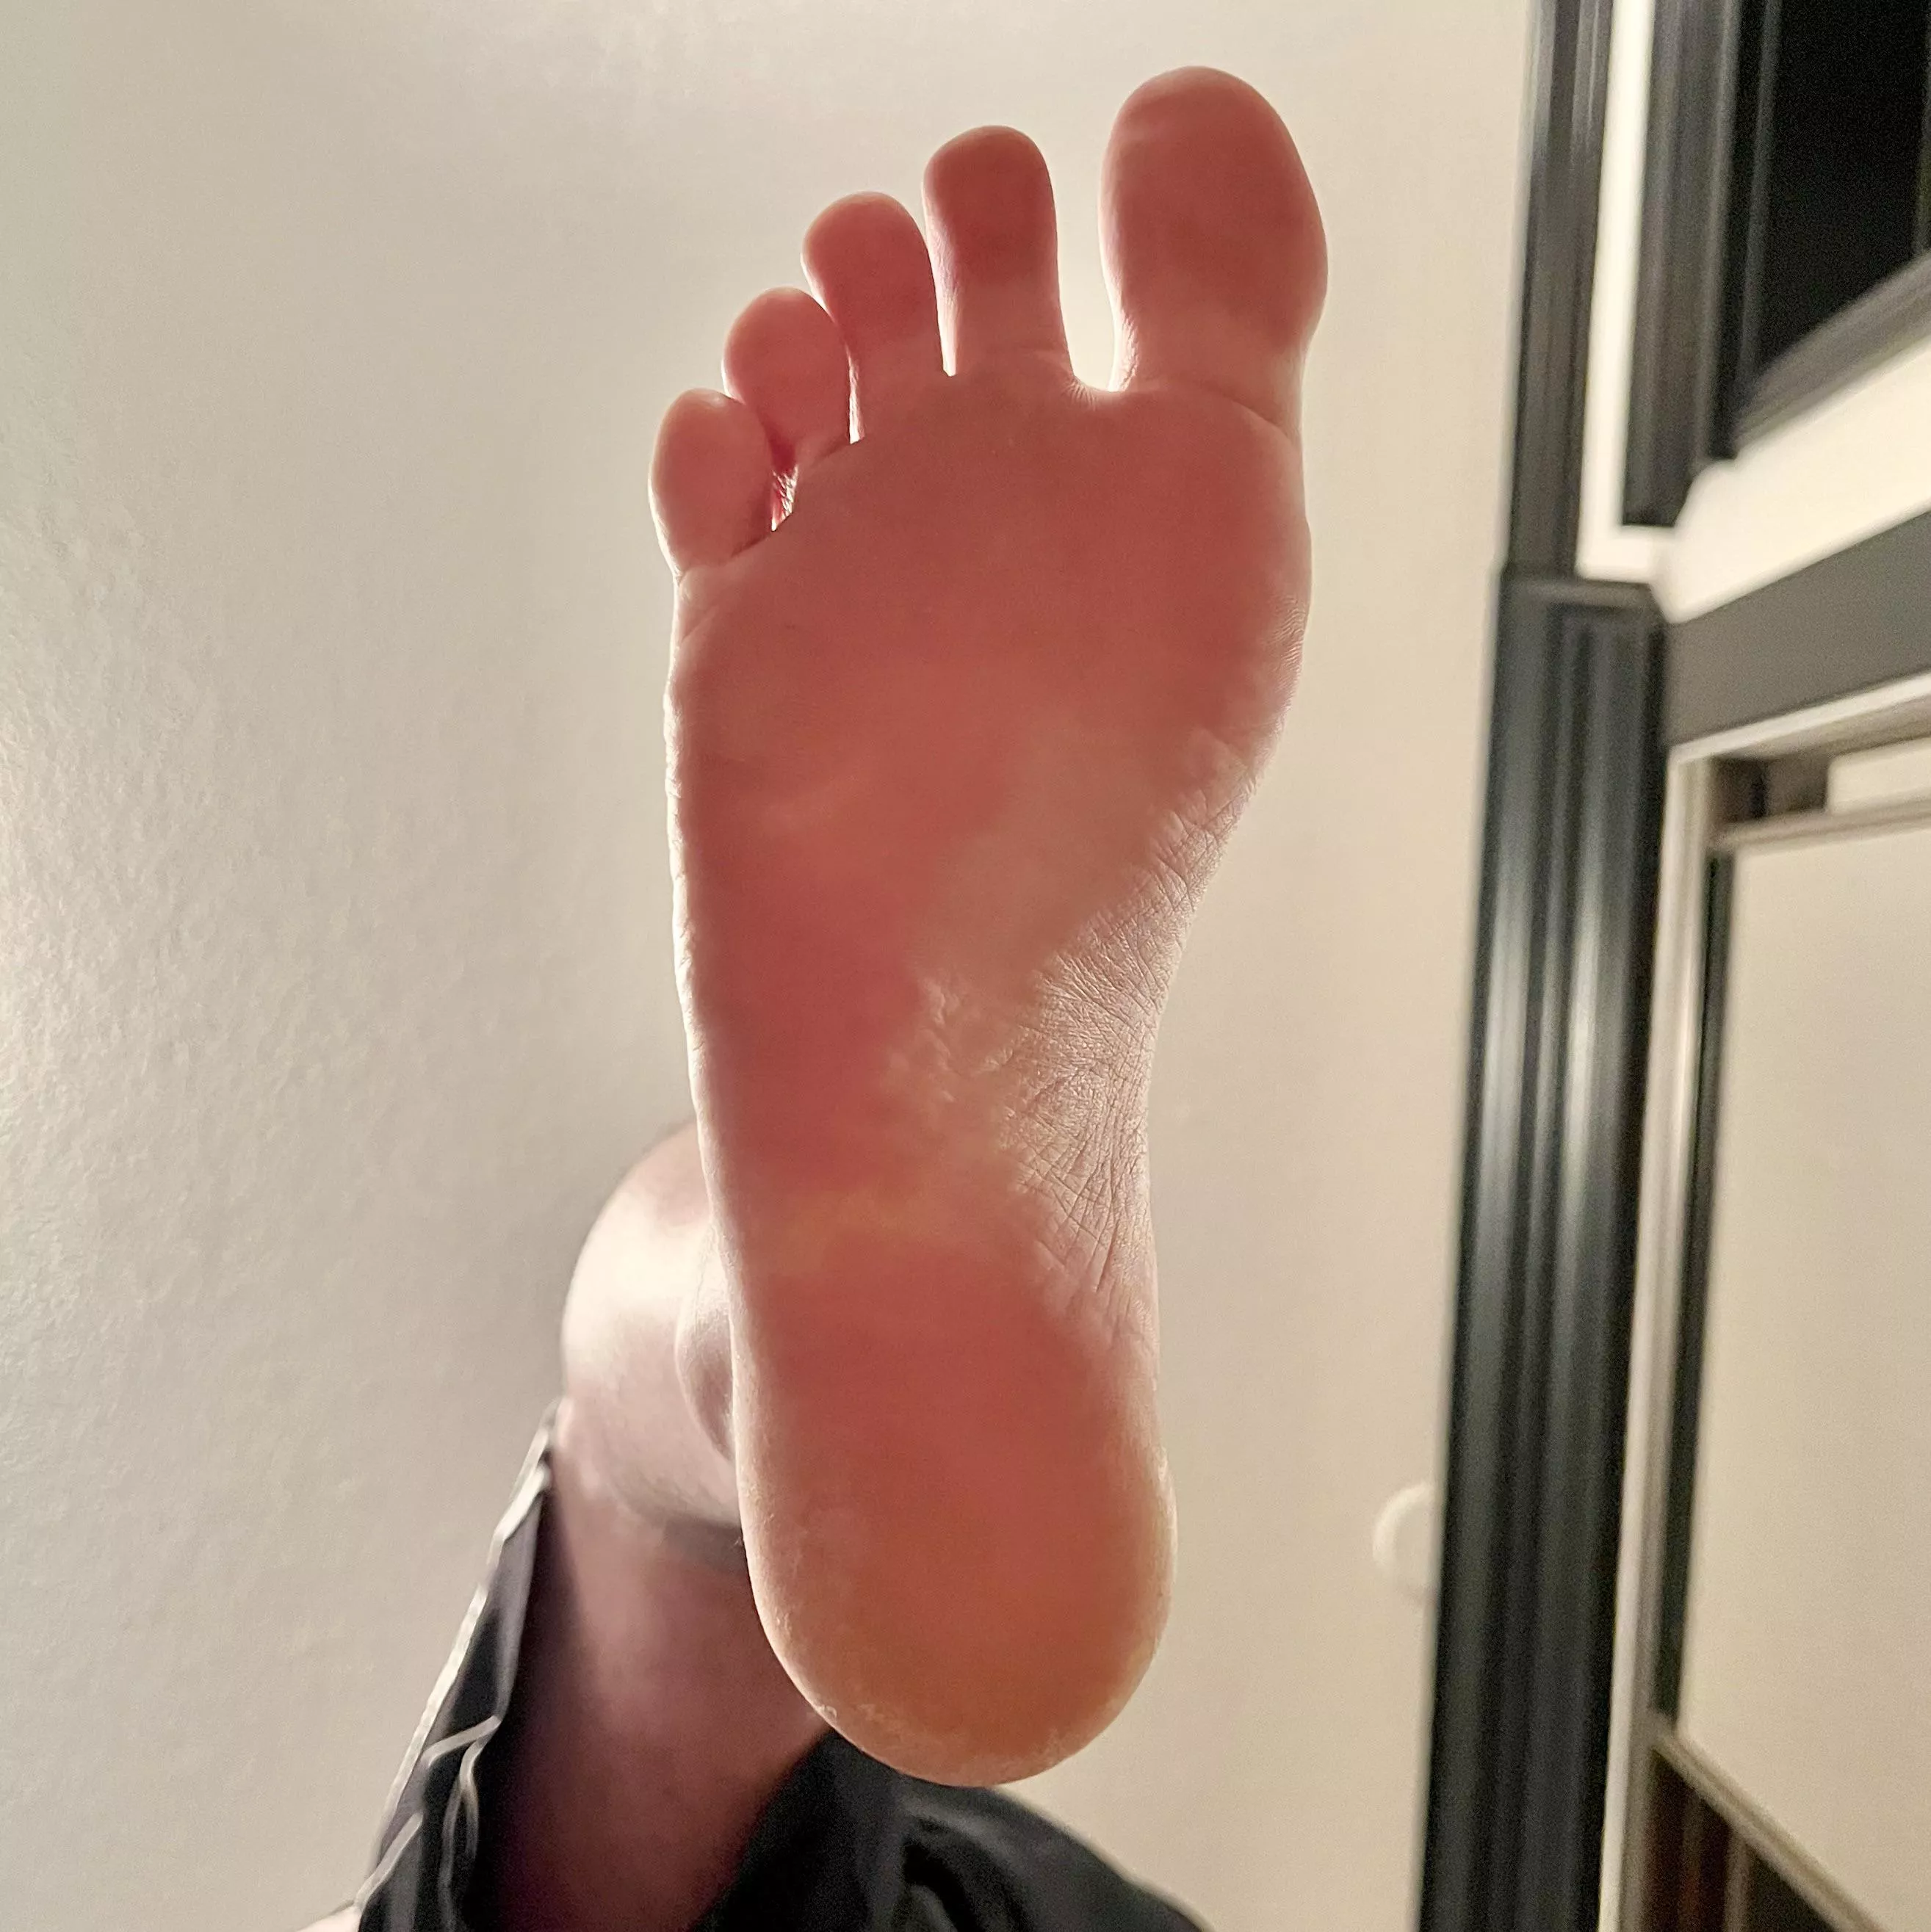 Foot View Nudes - How is the view under my size 12 right foot nudes by Warhawk212